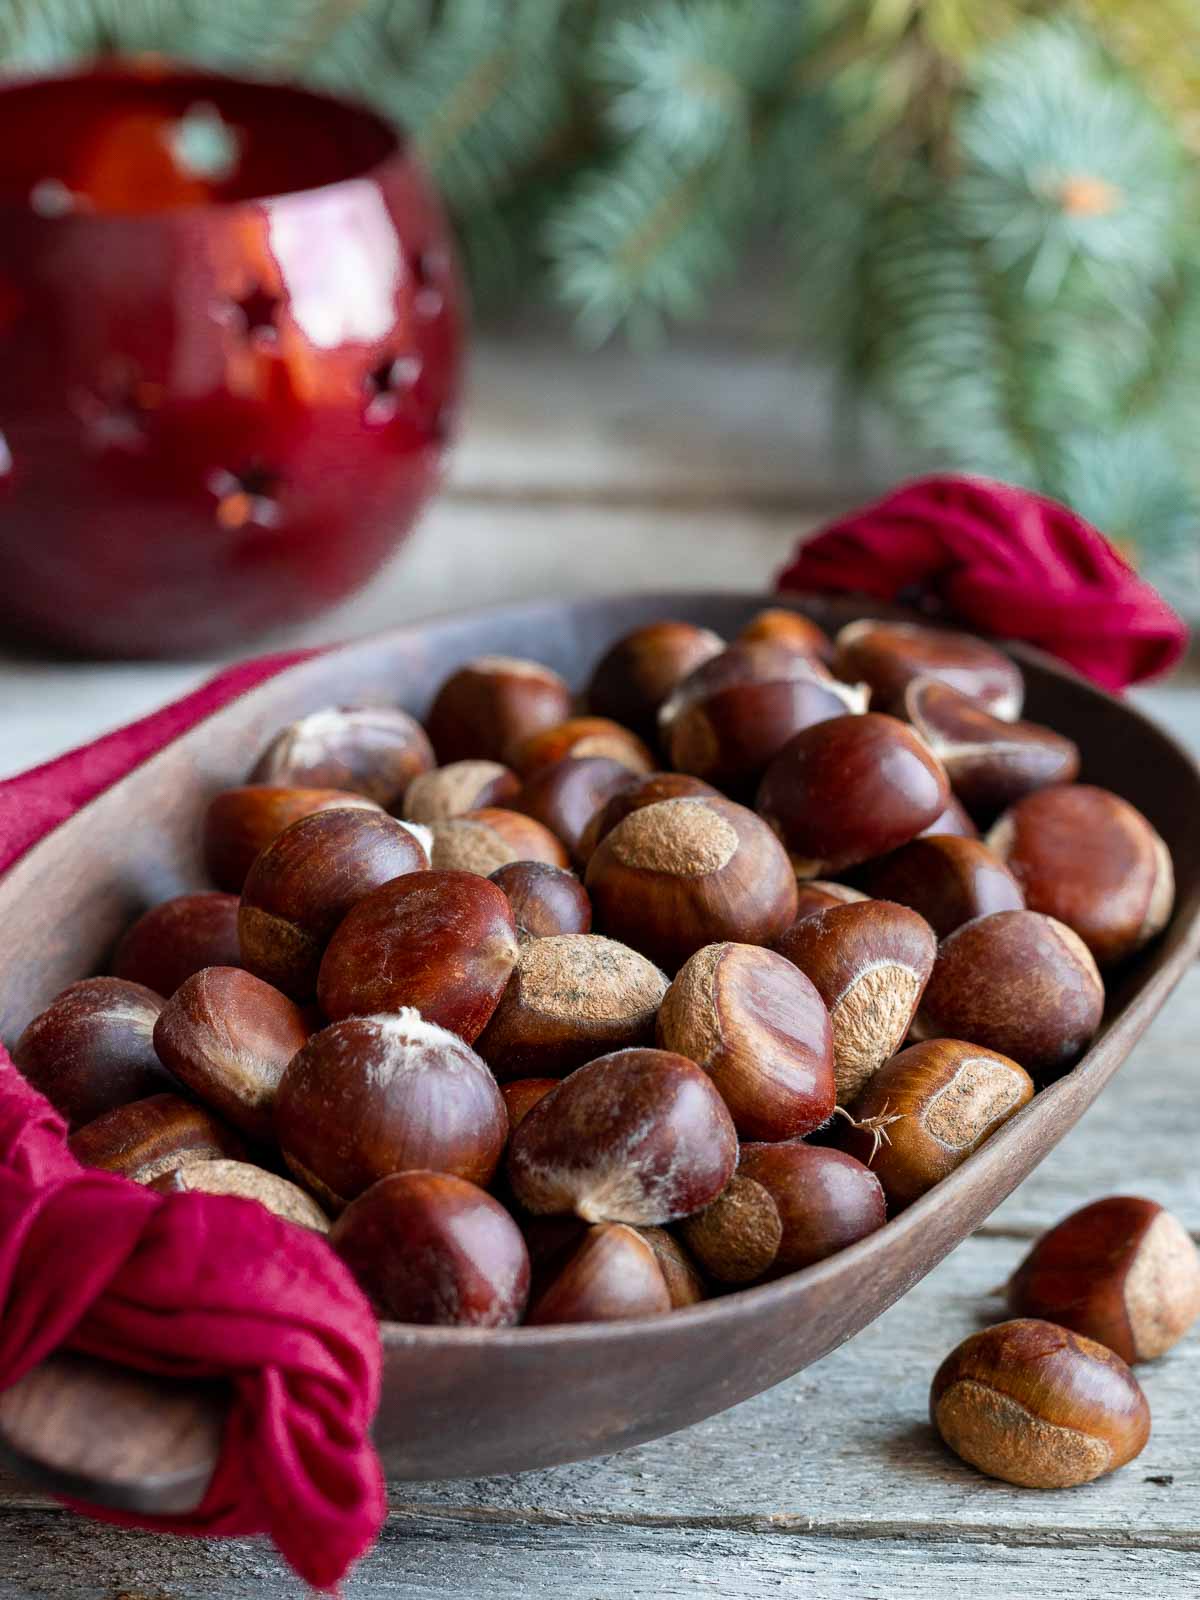 Raw chestnuts in a wooden bowl with holiday decorations around the bowl.